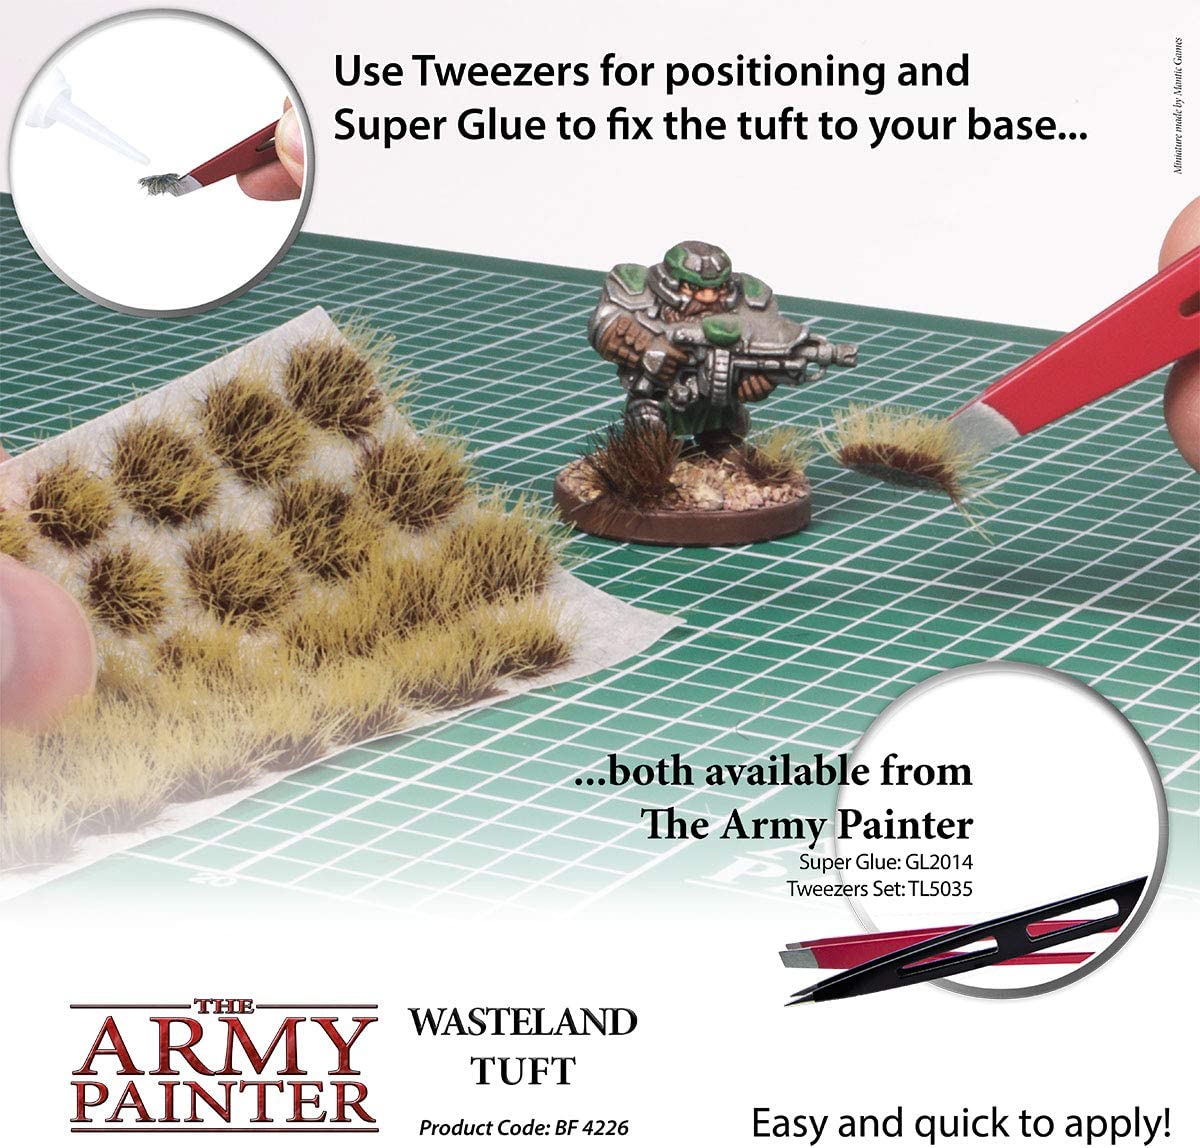 The Army Painter - Tufts: Wasteland